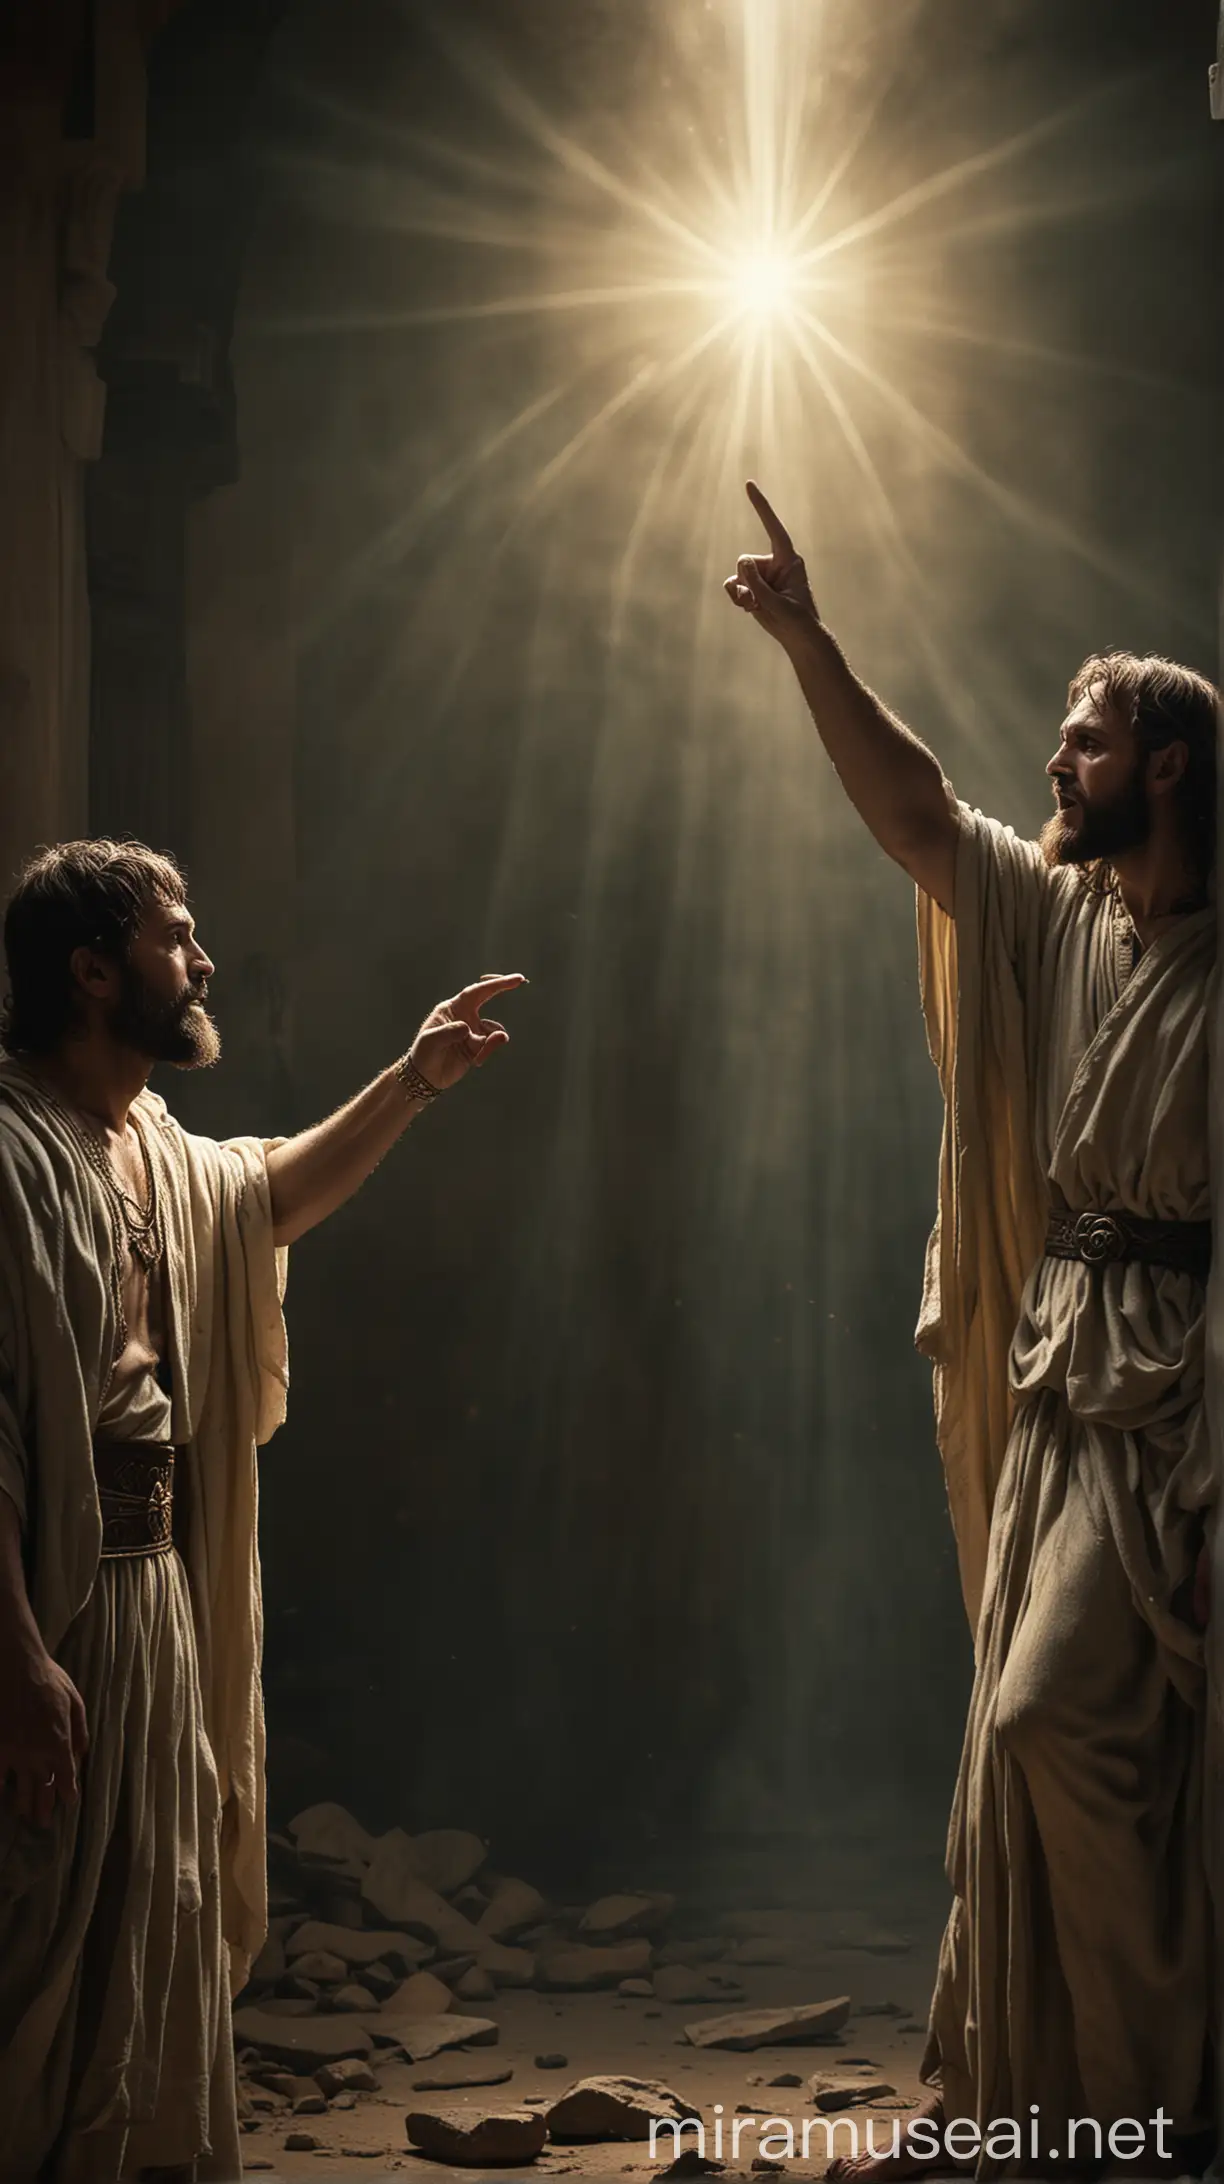 A dramatic scene depicting Paul pointing his finger at Barjesus, who is shown shrinking back in fear. A bright light emanates from Paul's outstretched hand, symbolizing the power of God. The background is darkened to emphasize the intense moment.In ancient world 